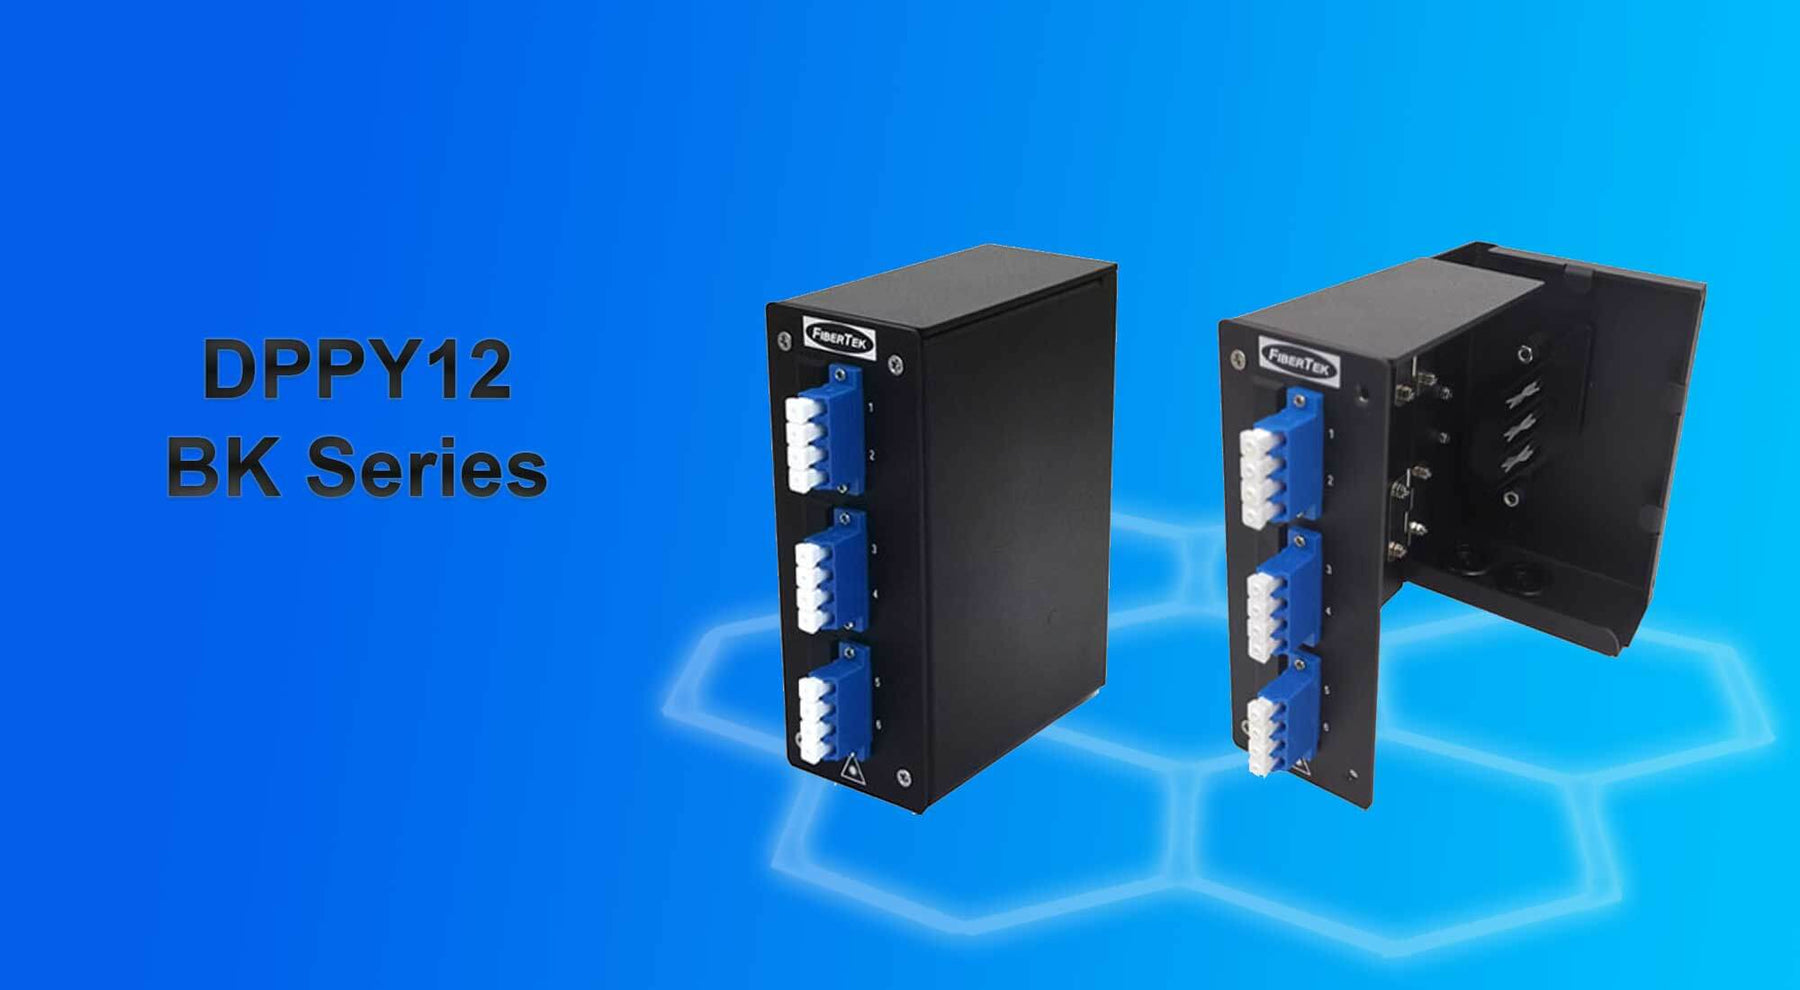 DPPT12 Series is being replaced by DPPY12 BK Series